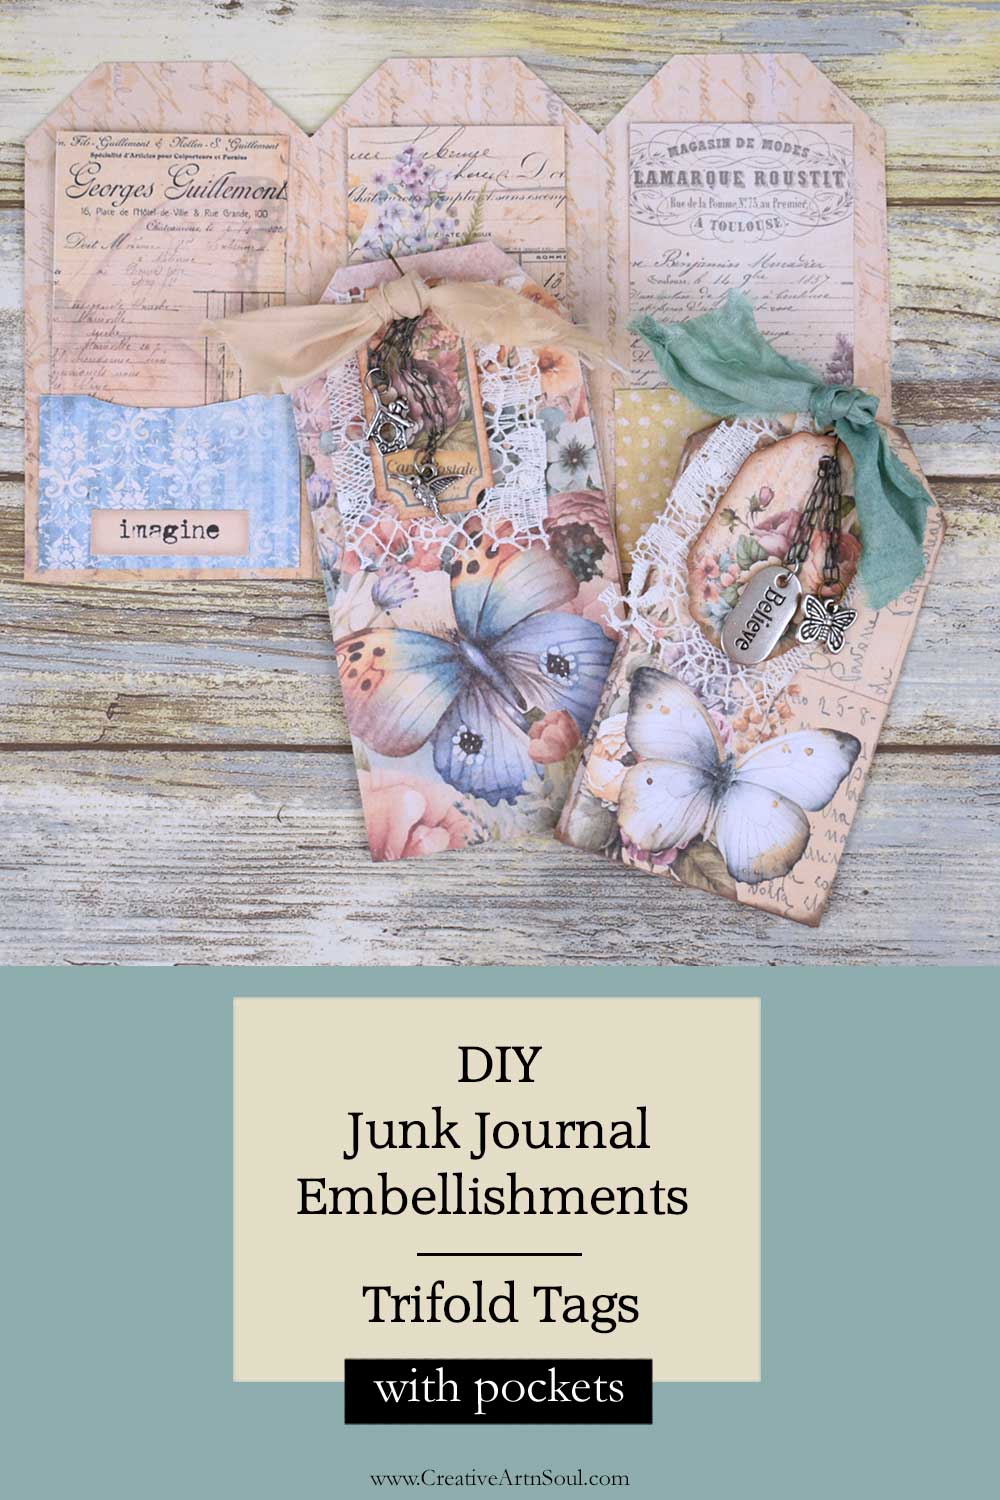 DIY Printable Junk Journal Embellishments: Trifold Tags with Pockets